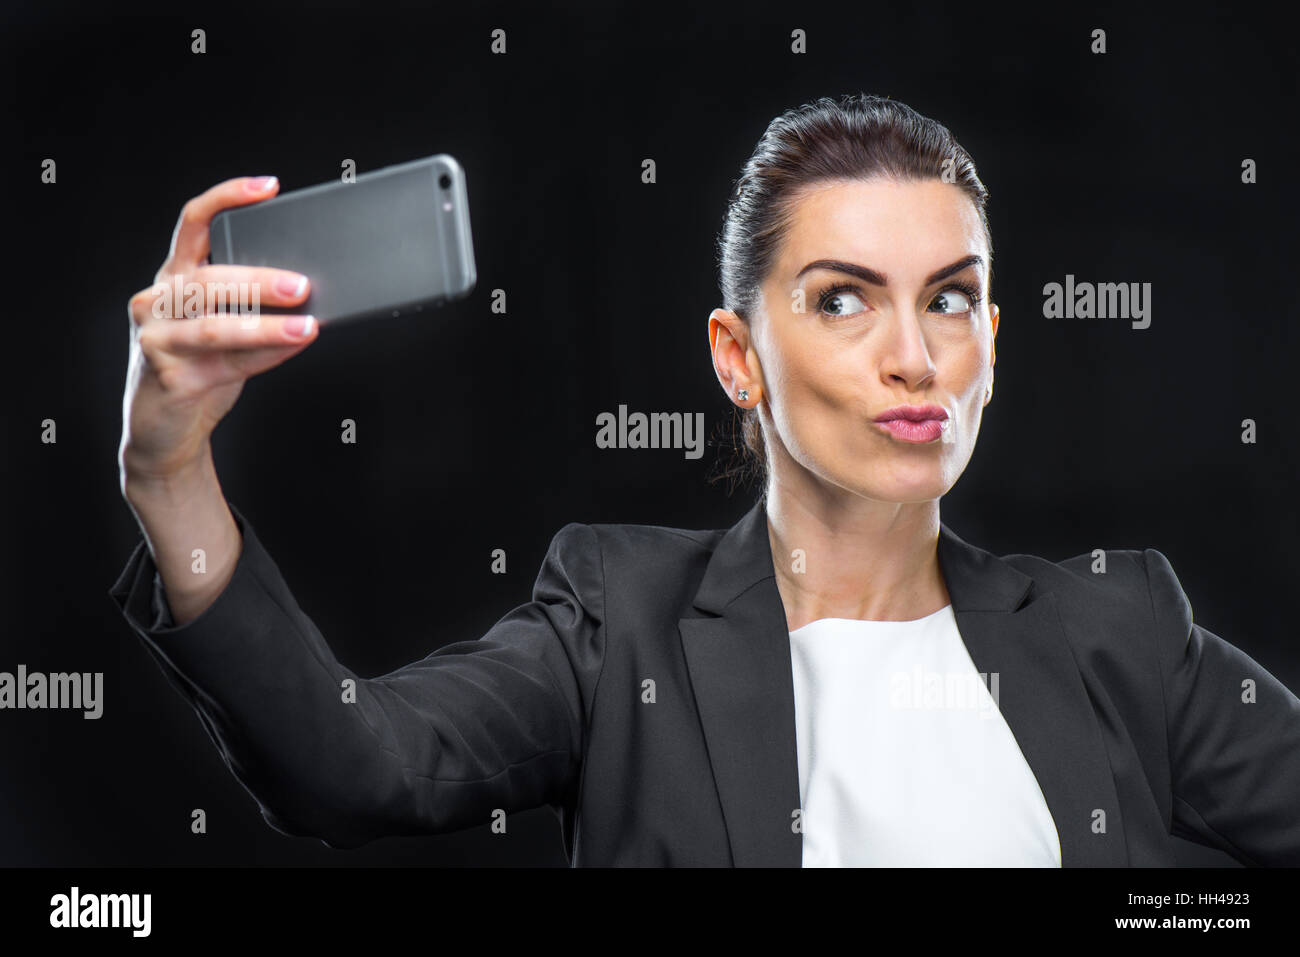 Businesswoman using smartphone and making duckface while taking selfie Stock Photo